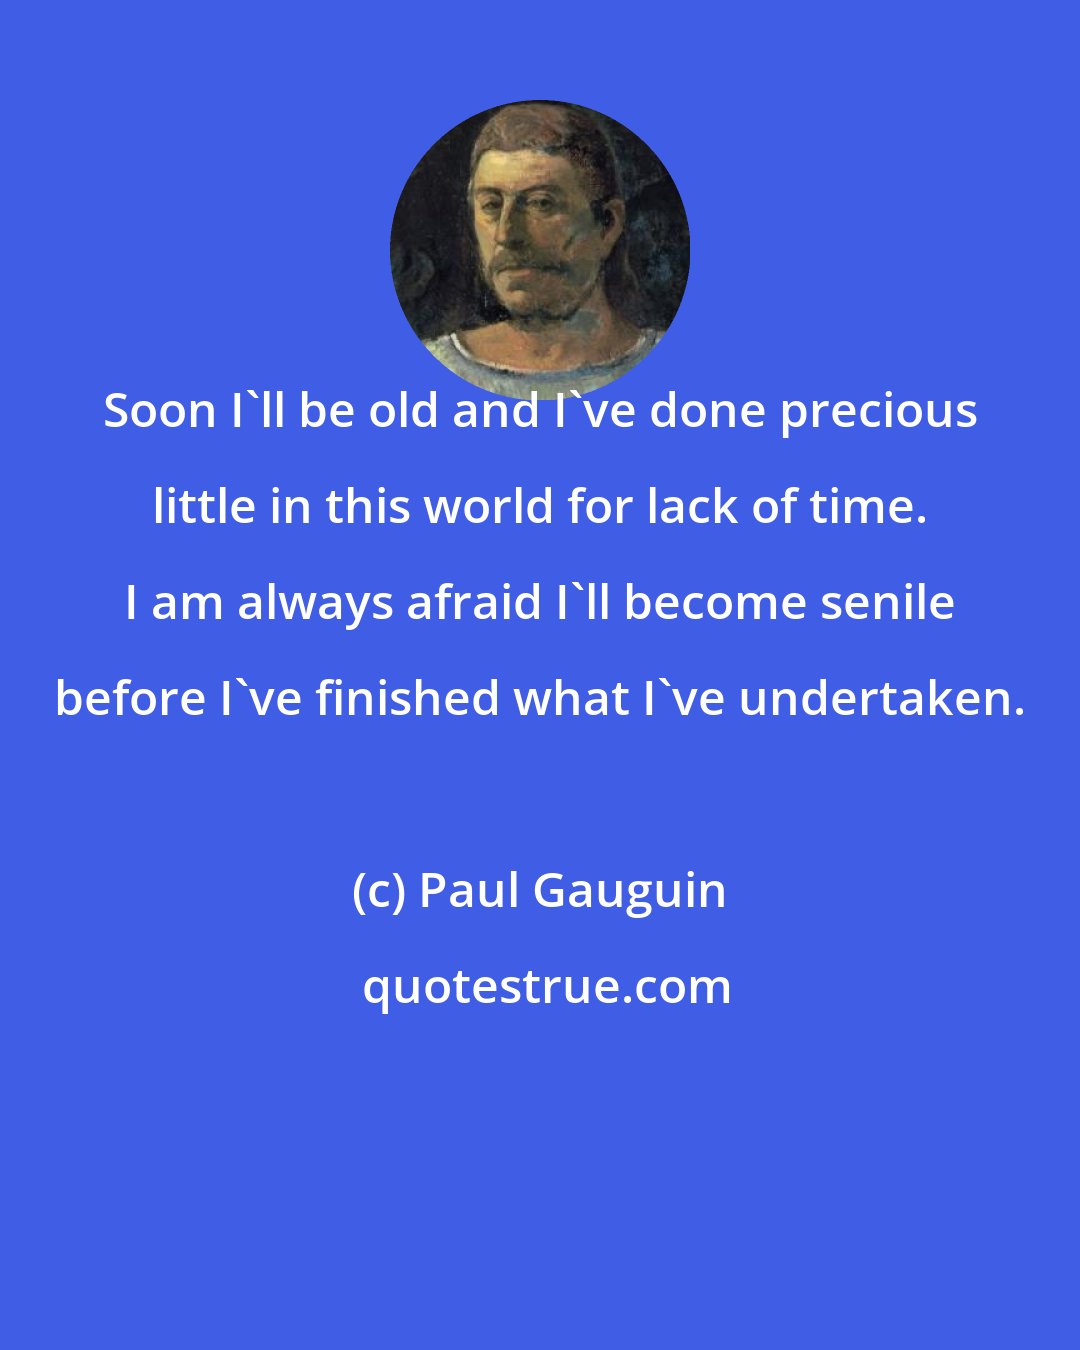 Paul Gauguin: Soon I'll be old and I've done precious little in this world for lack of time. I am always afraid I'll become senile before I've finished what I've undertaken.